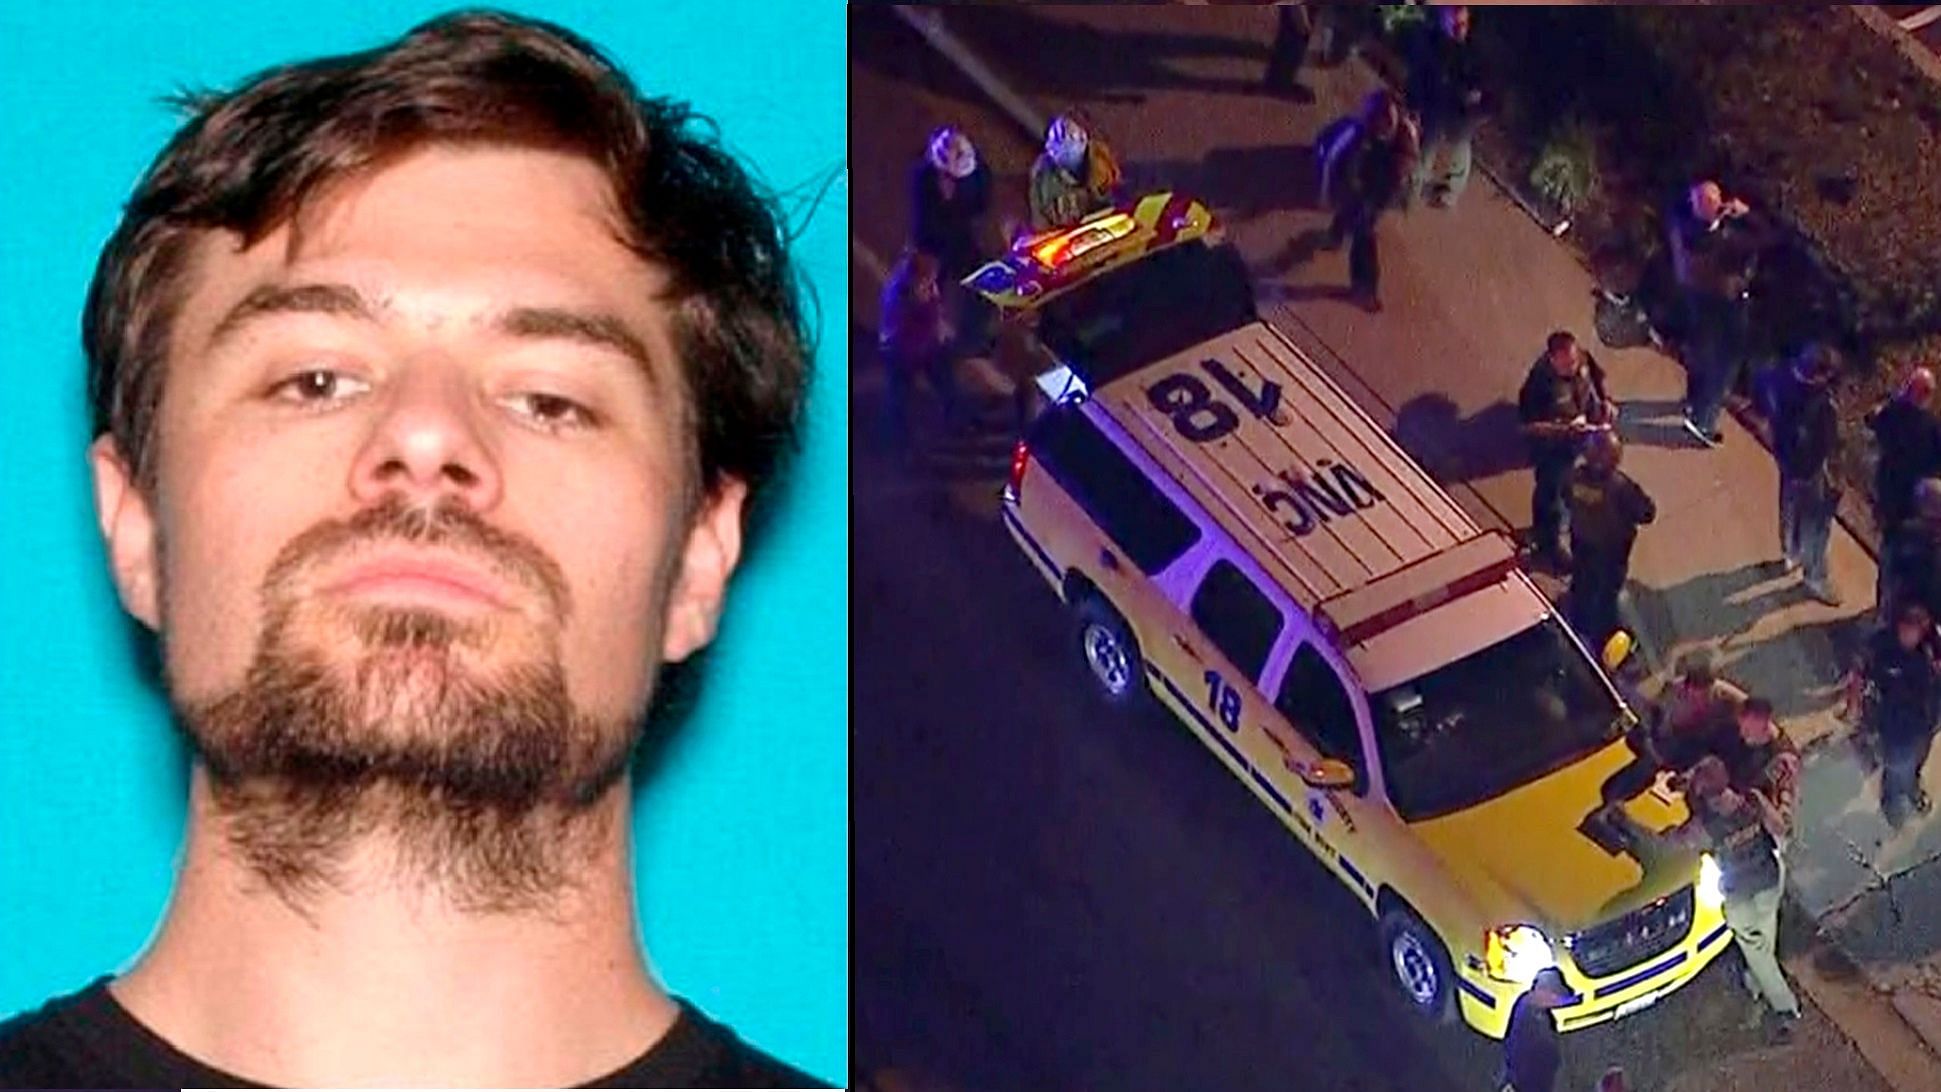 Ian David Long, a Marine combat veteran, opened fire at a country music bar in Southern California, killing multiple people.